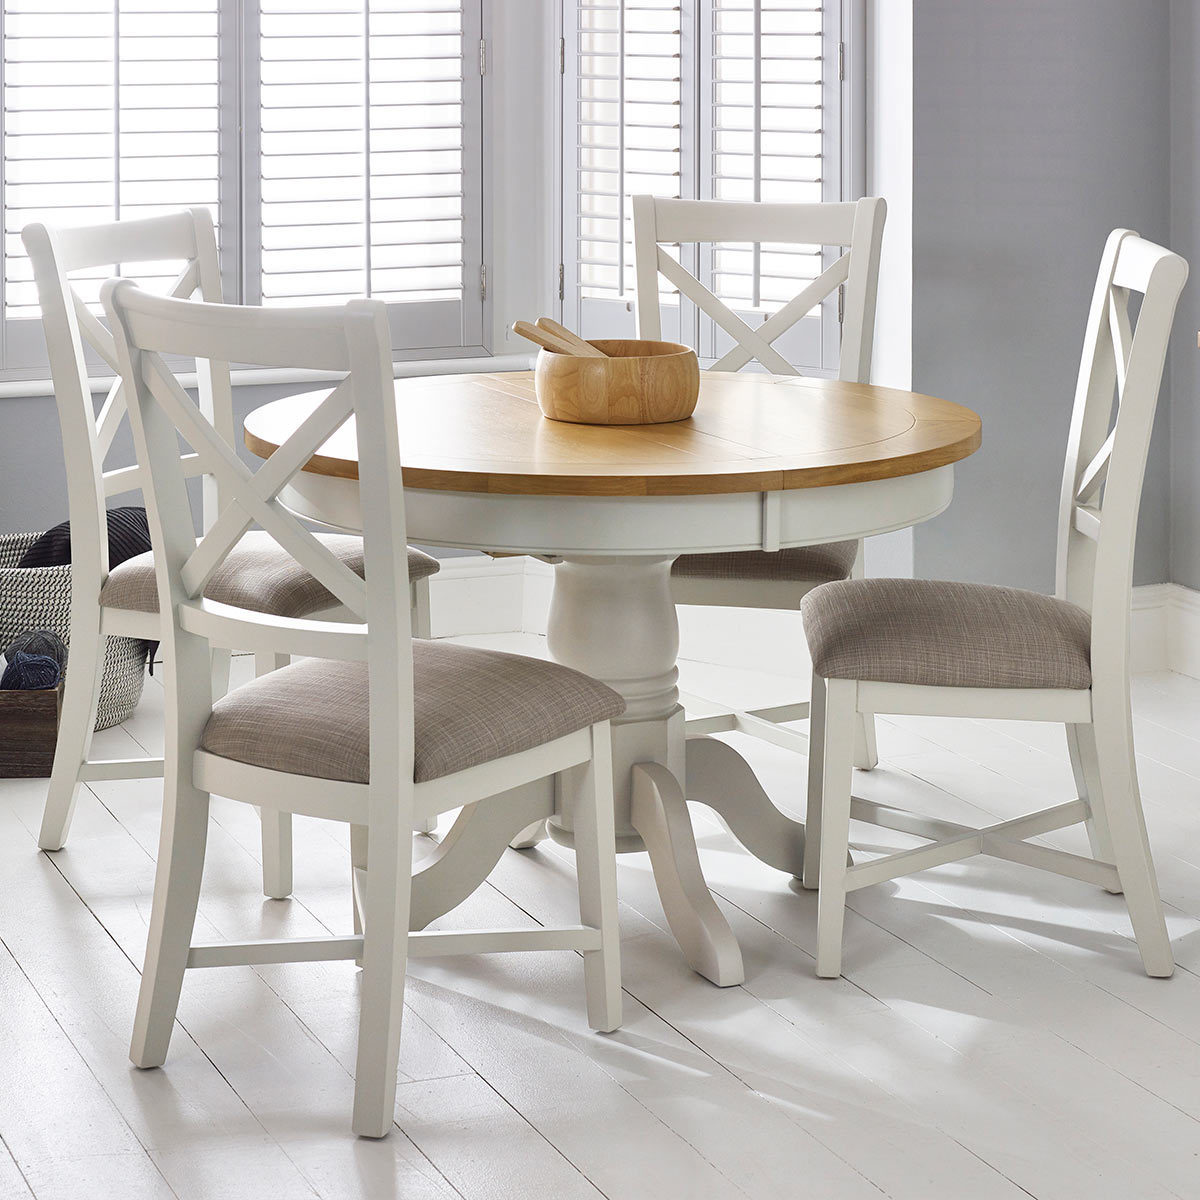 Bordeaux Painted Ivory Round Extending Dining Table 4 Chairs Seats 4 6 Costco Uk